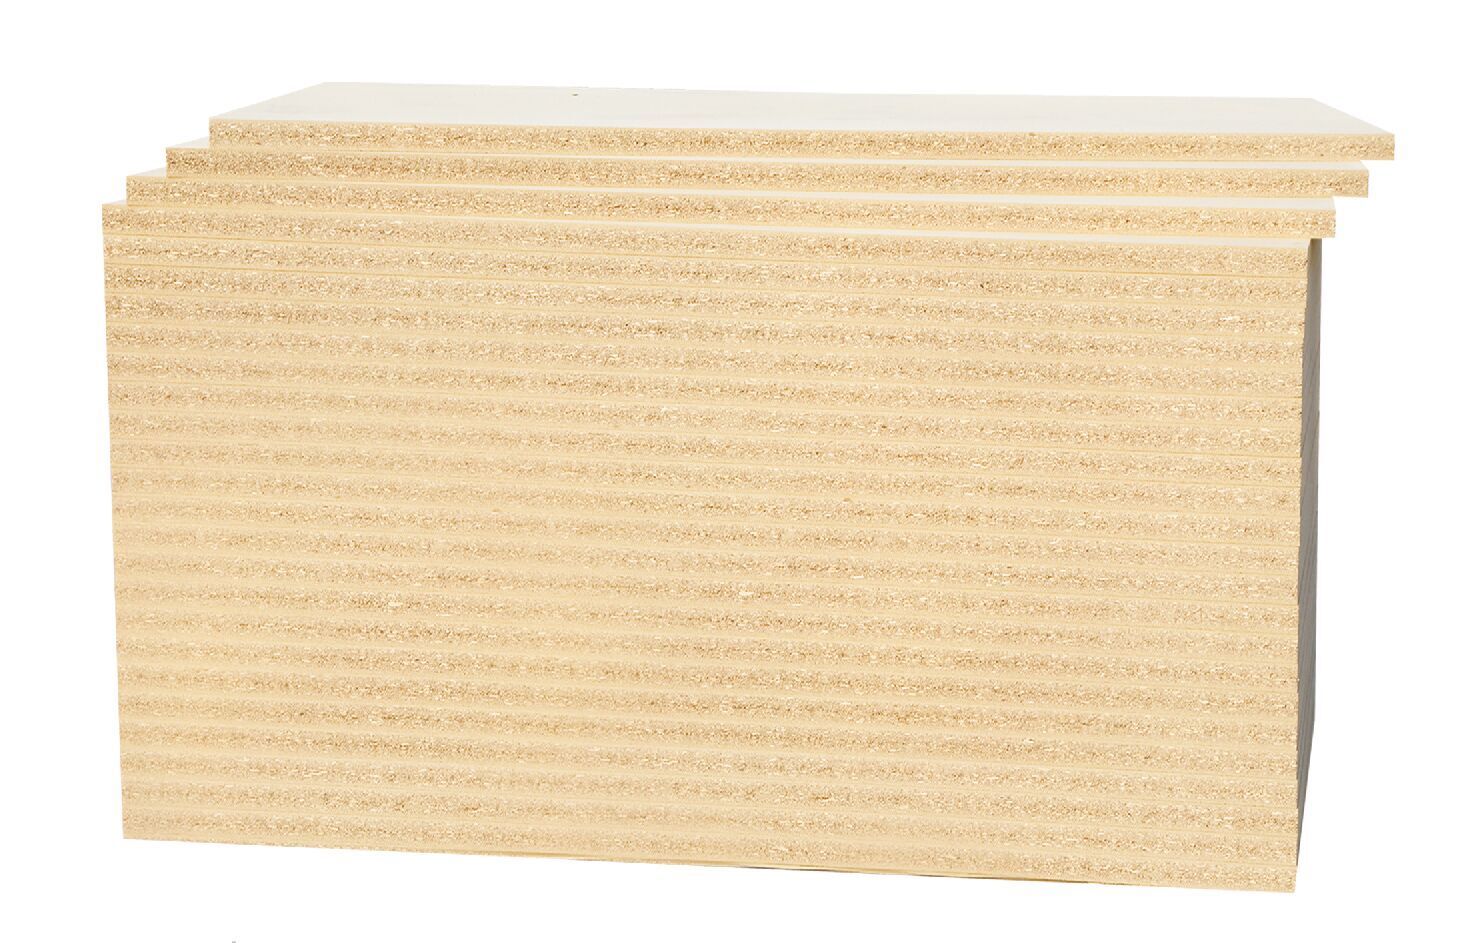 FD 30MINS FIRE RATED PARTICLEBOARD